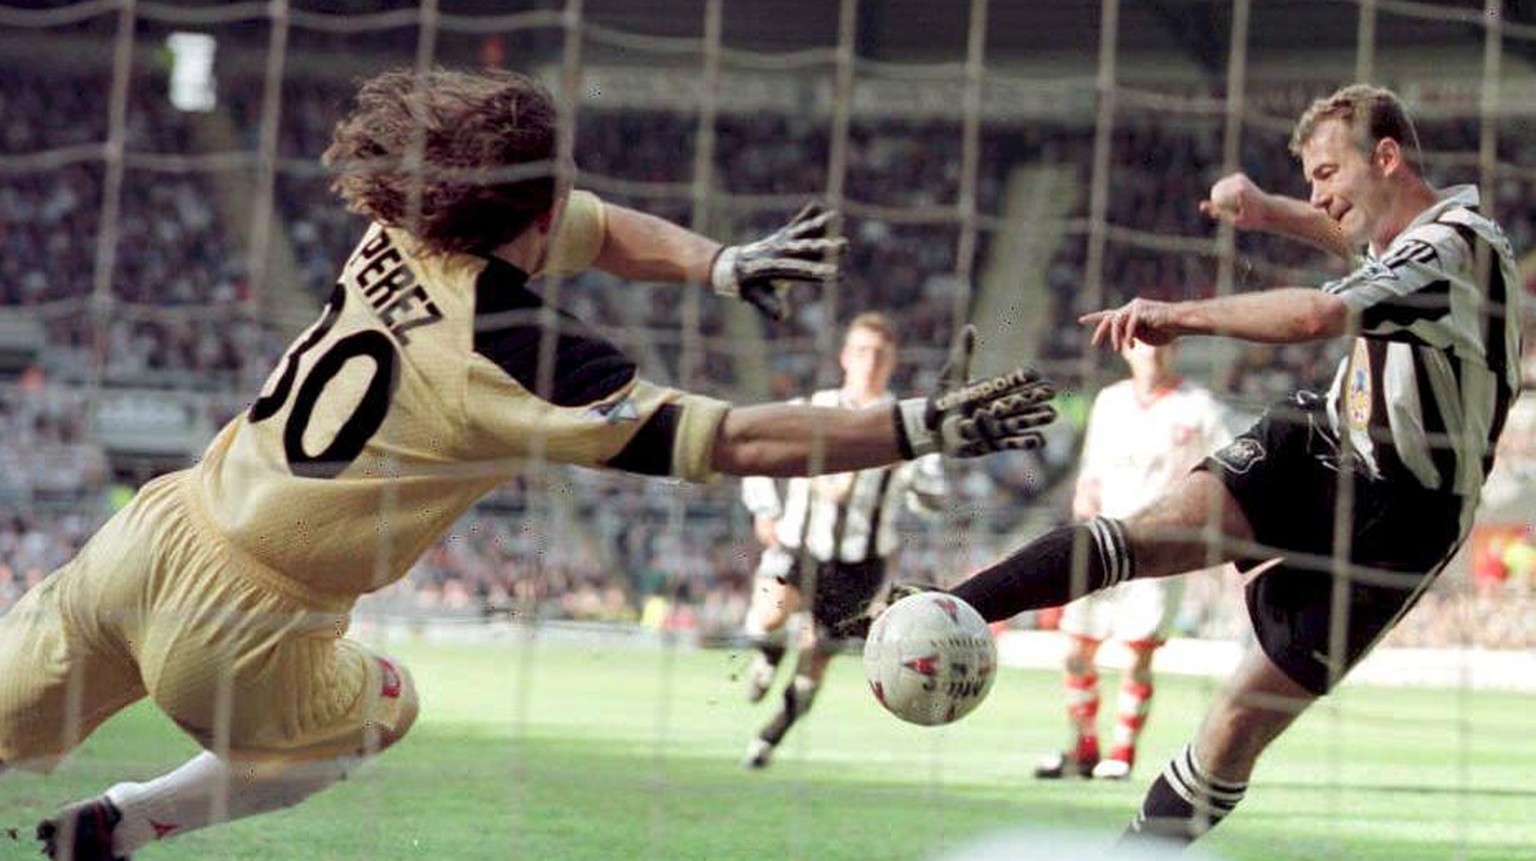 Newcastle&#039;s Alan Shearer scores Newcastle&#039;s late equaliser against Sunderland&#039;s goalie Lionel Perez at St James&#039; Park 05 April. The match ended in a 1-1 draw. (KEYSTONE/PA/OWEN HUM ...